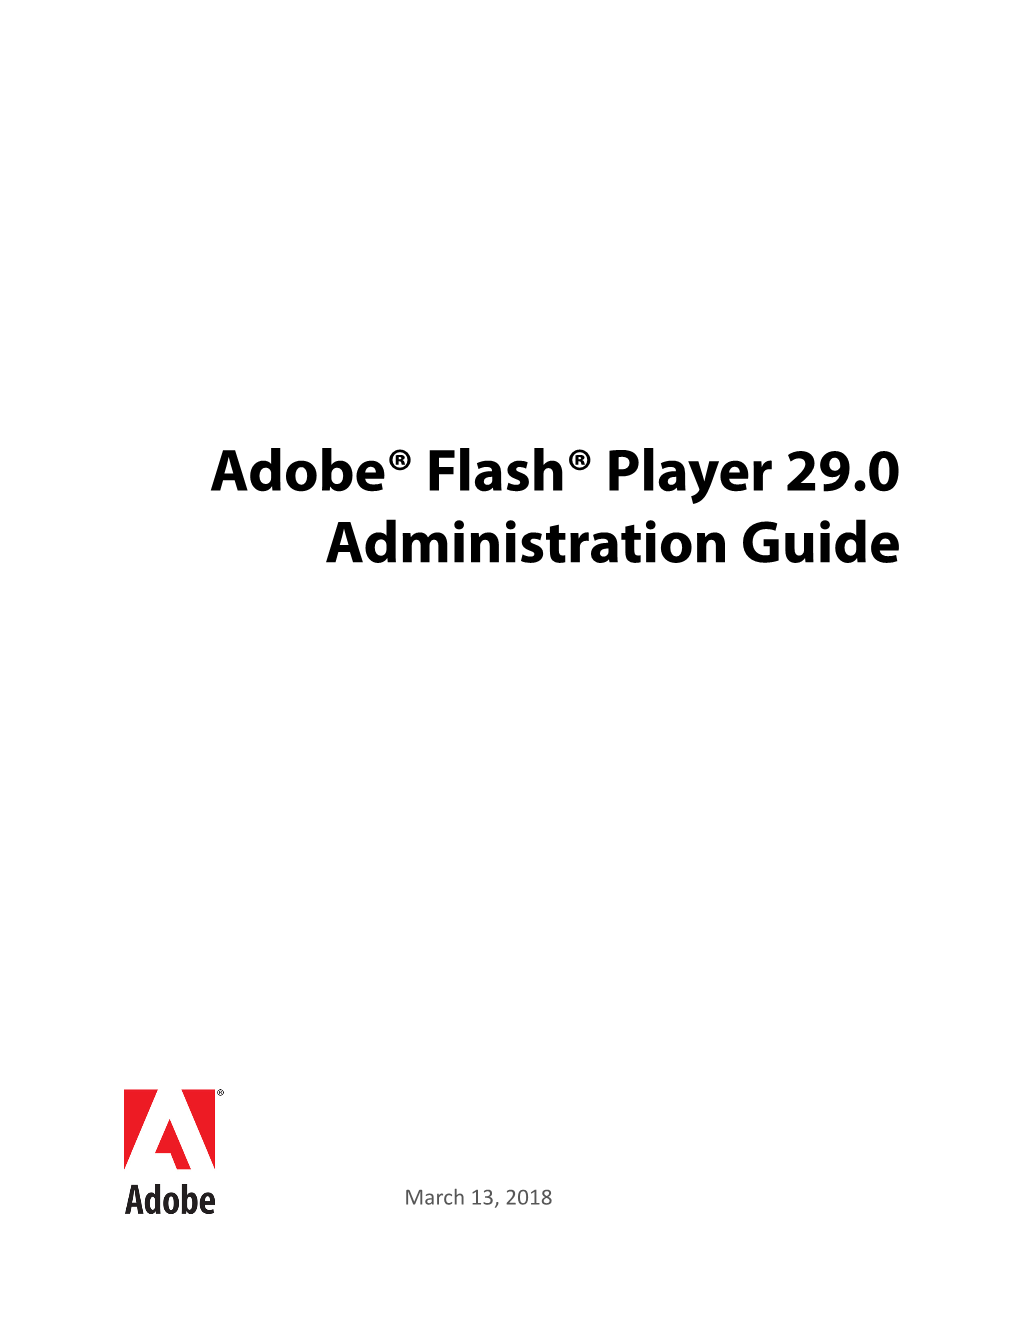 Adobe® Flash® Player 26.0 Administration Guide